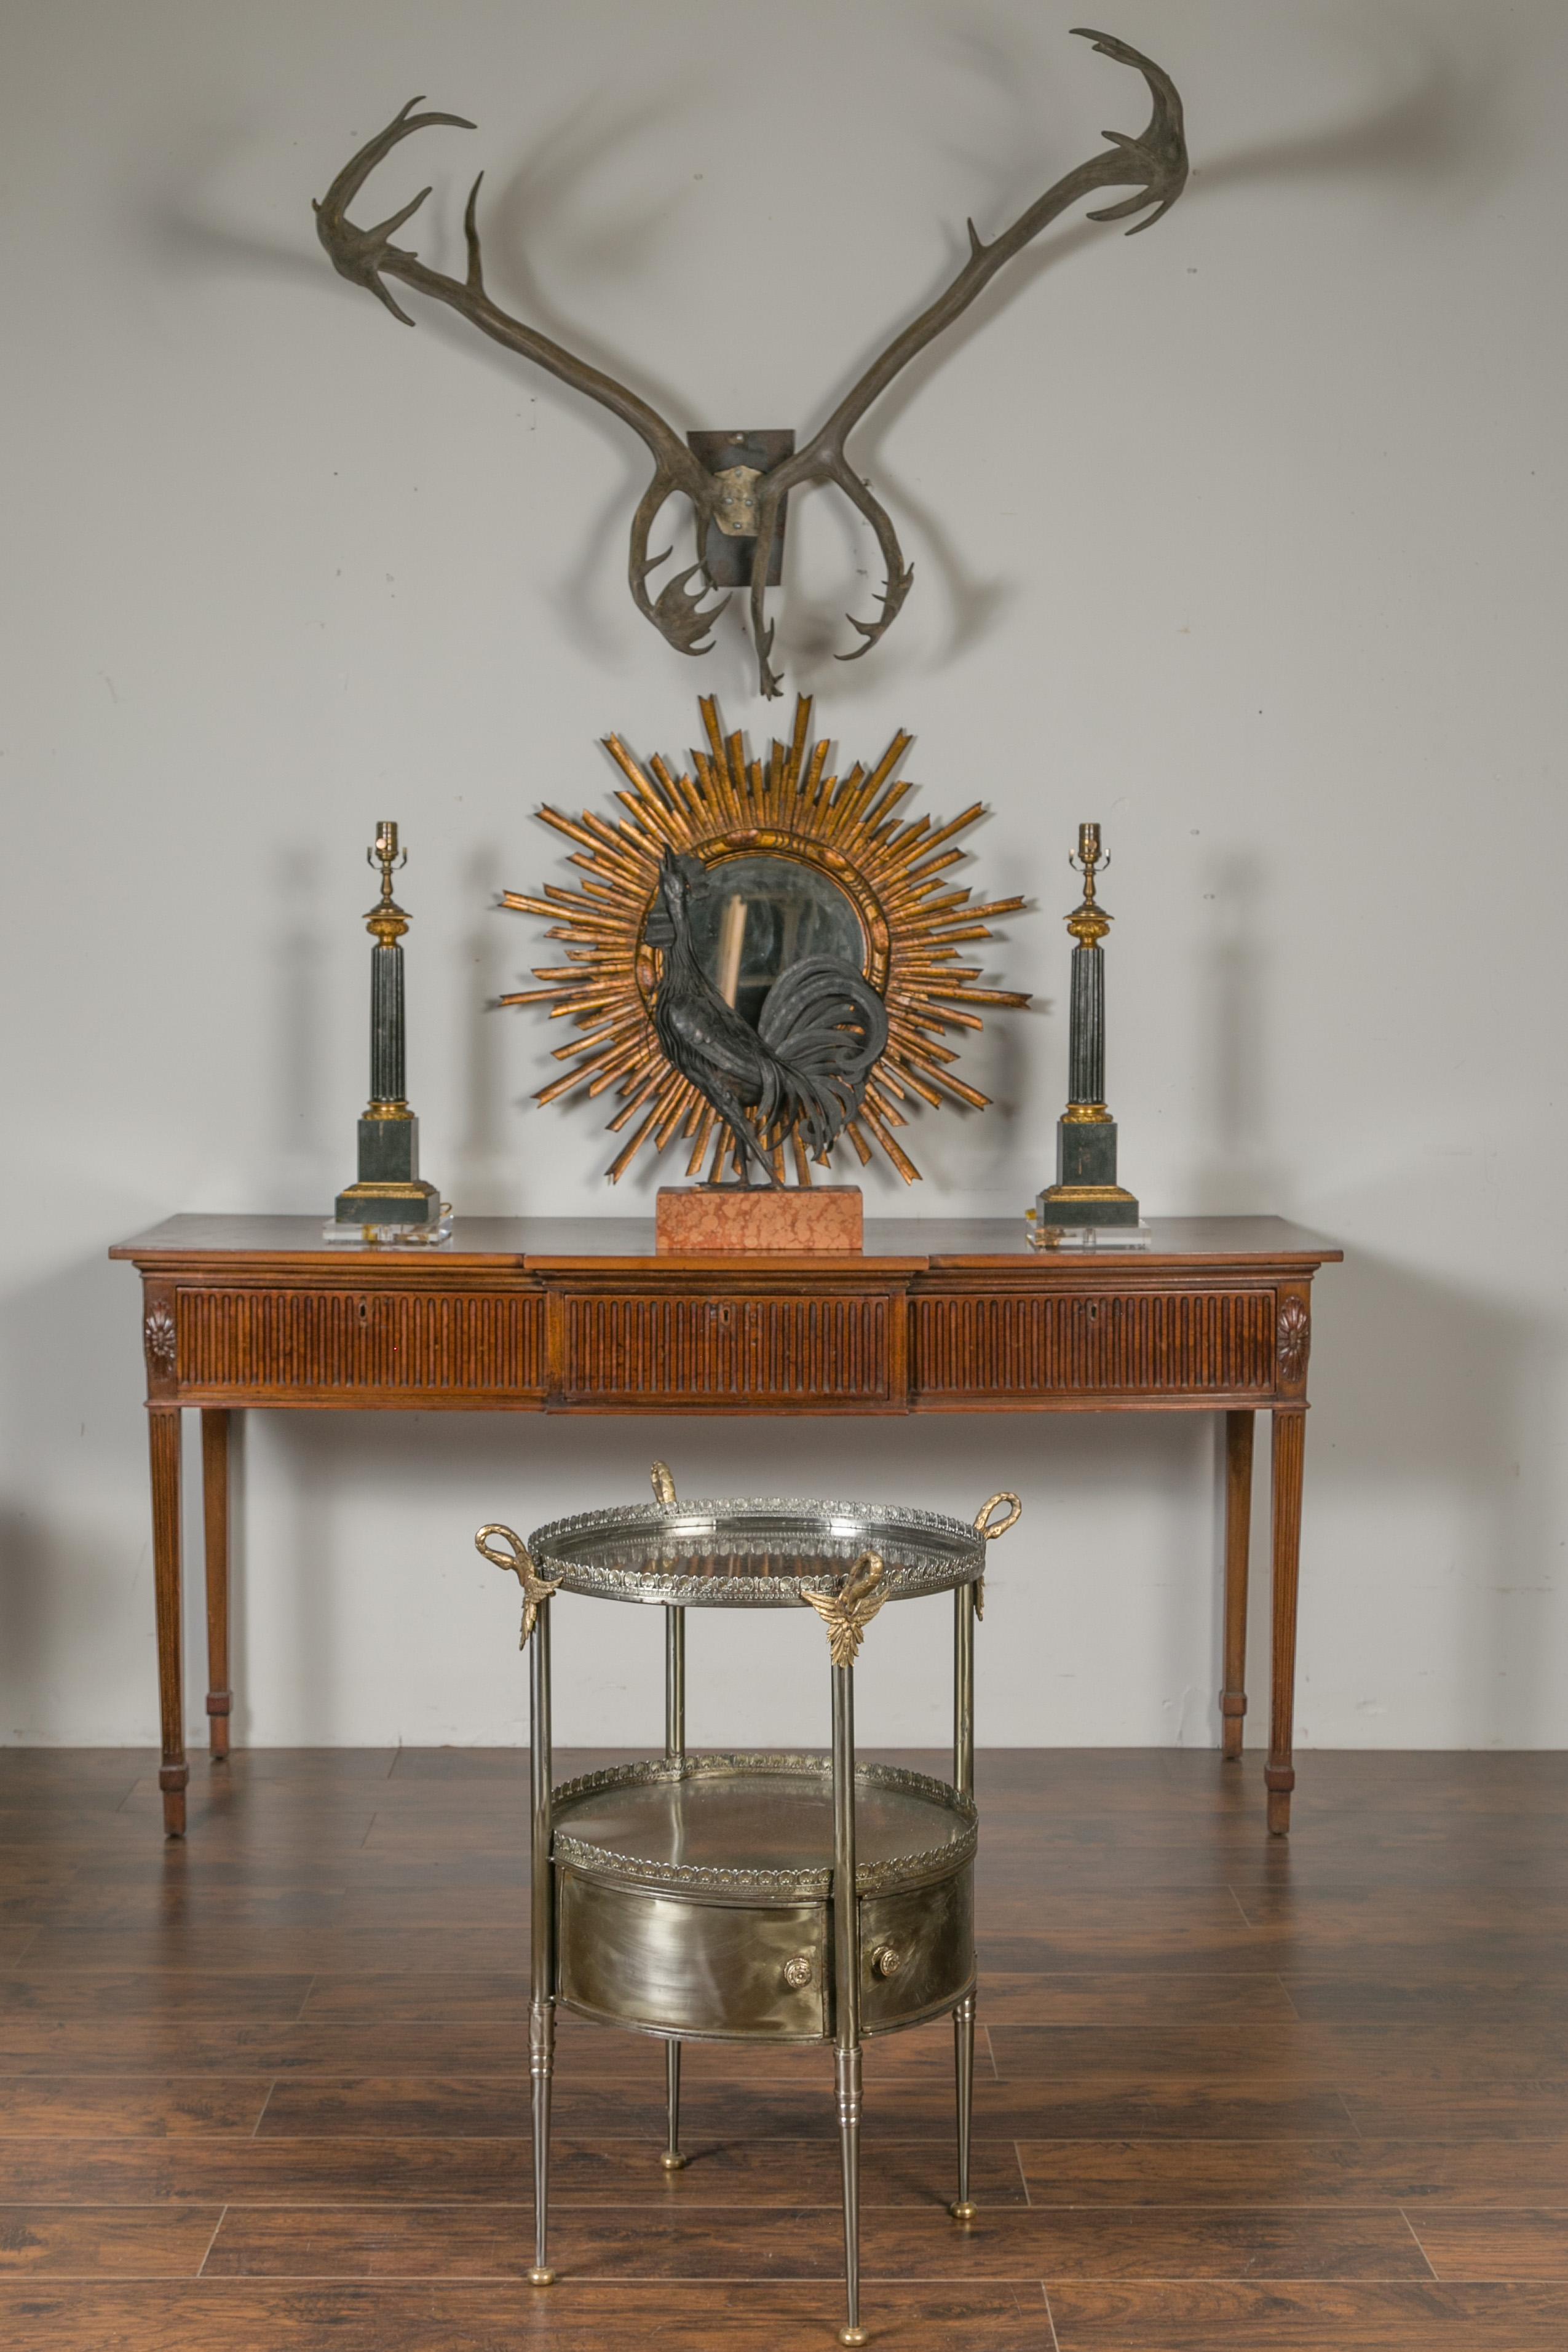 A vintage Italian steel and bronze round top side table from the mid-20th century with two doors, swan necks and wing motifs. Born in Italy during the midcentury period, this steel side table features an exquisite circular top, adorned with petite